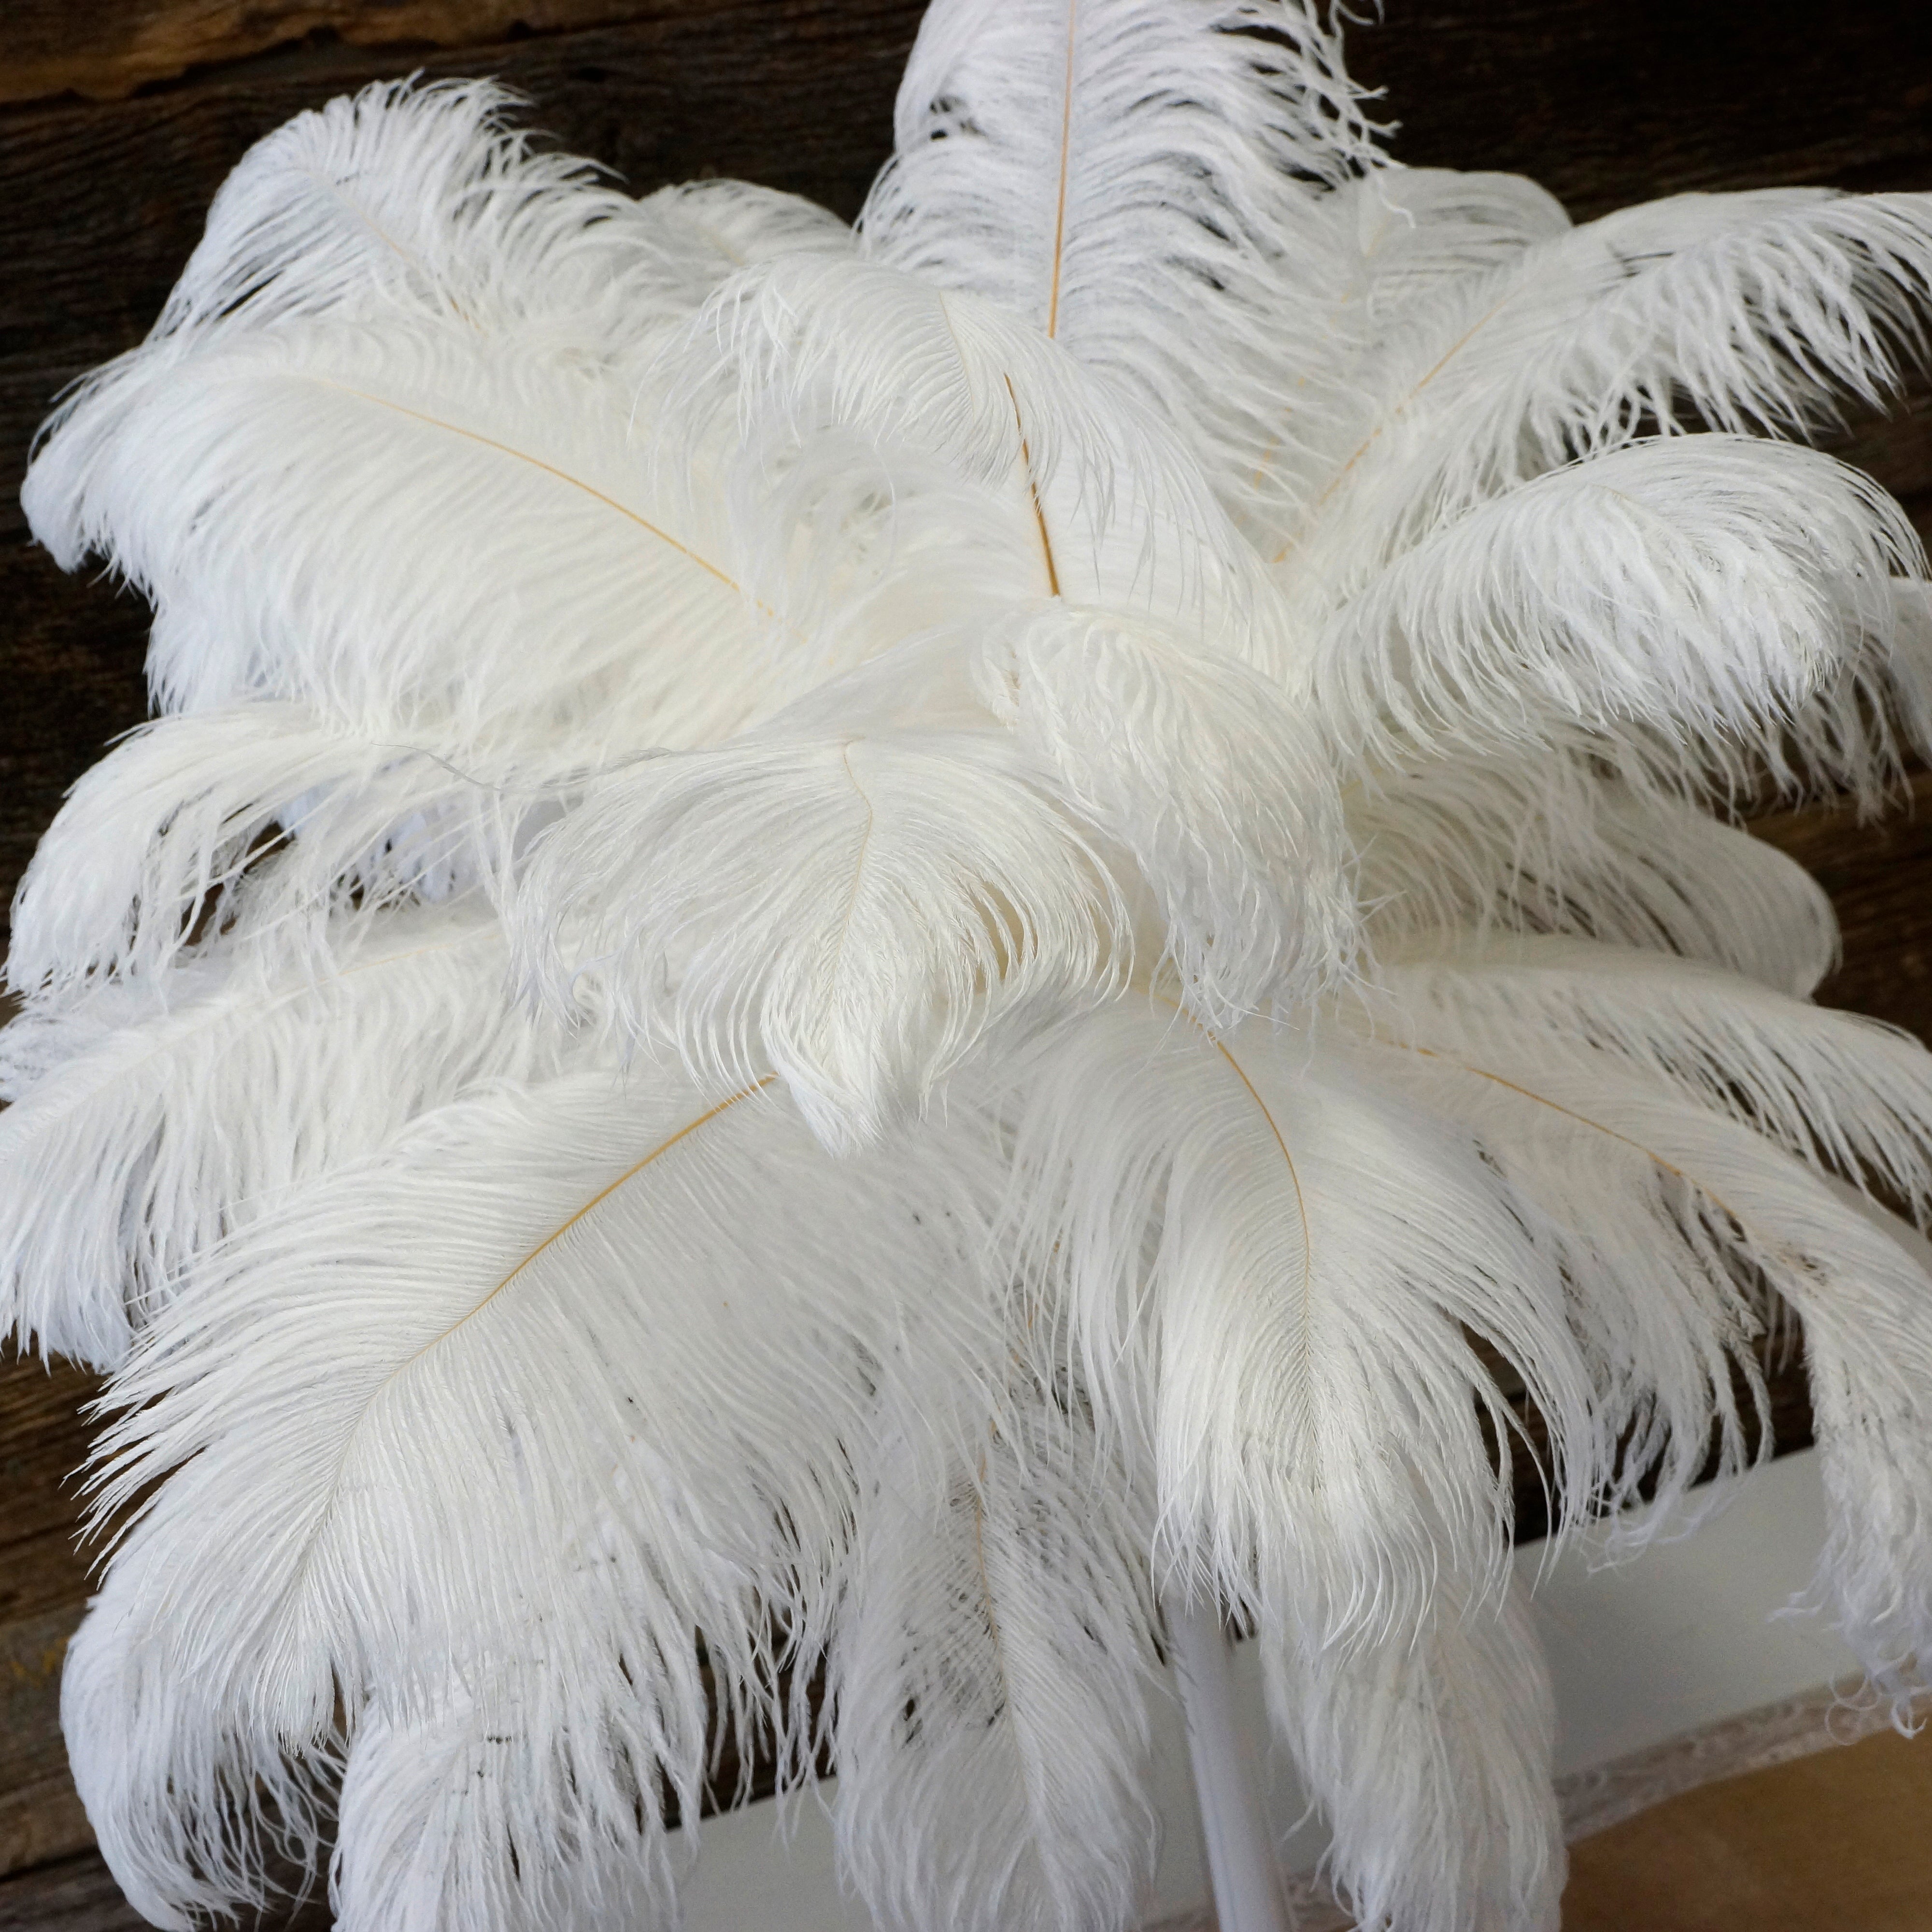 Variety Of Soft And Fluffy Wholesale Large White Feathers 